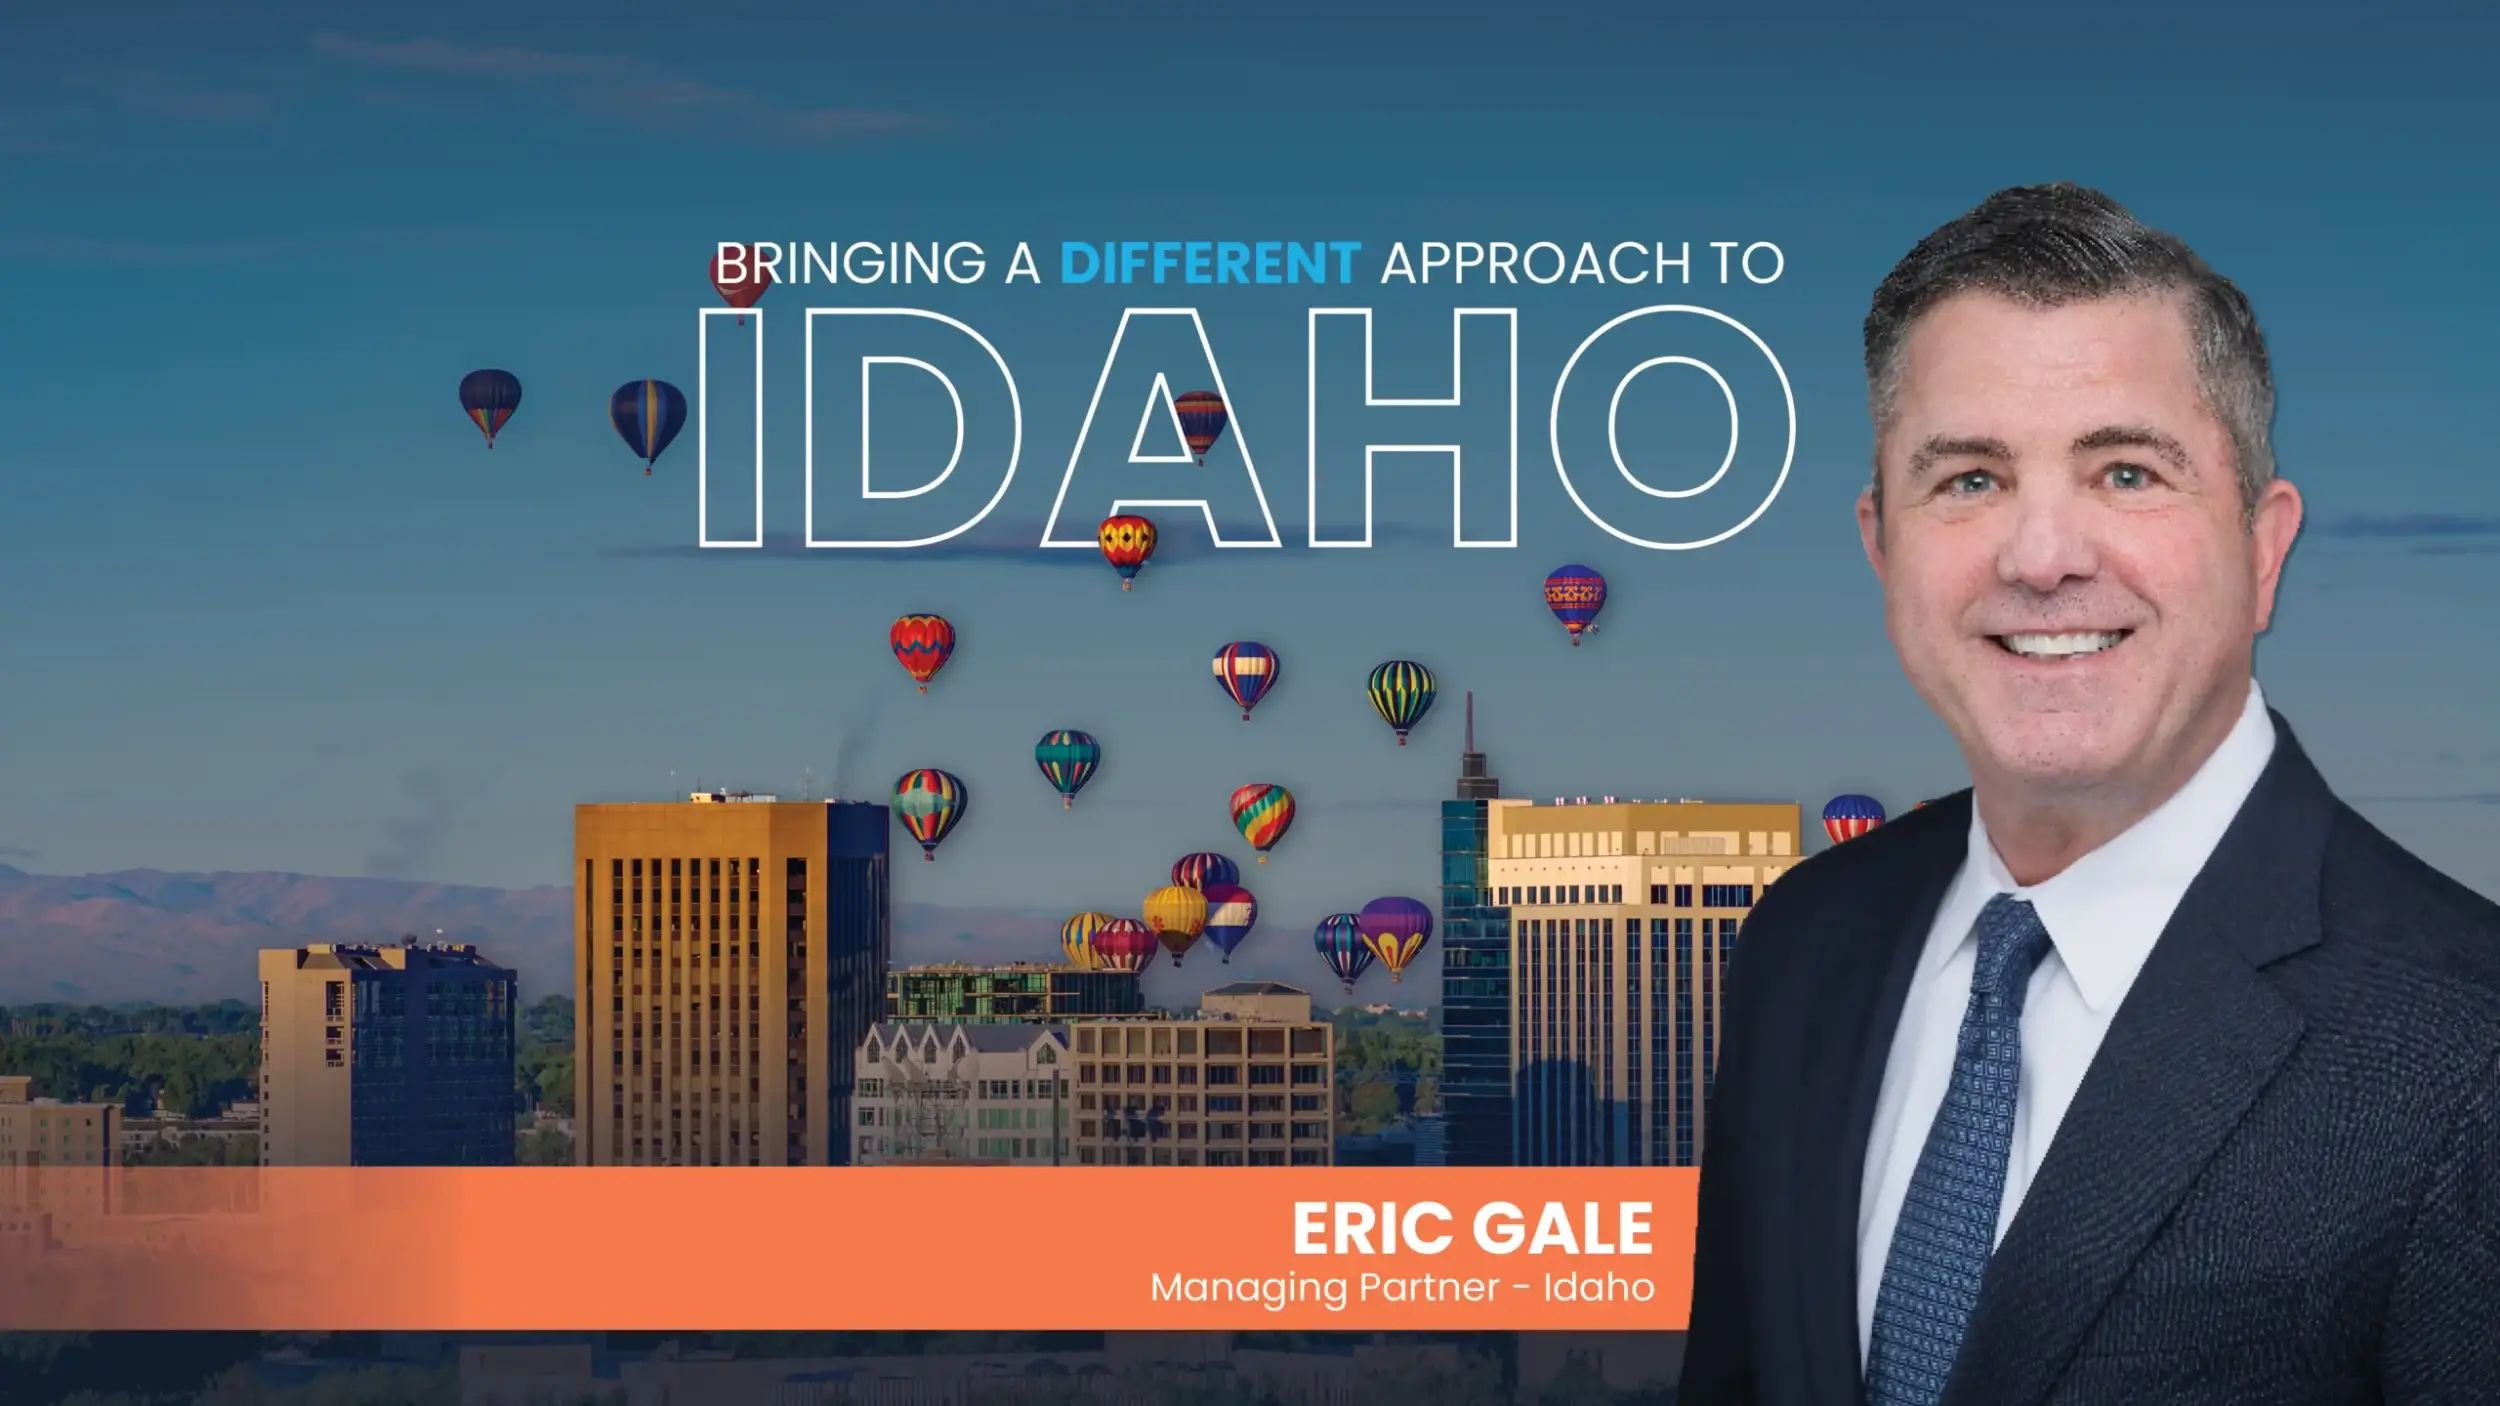 QPWB Expands Westward with New Idaho Hub and Managing Partner, Eric Gale at the Helm